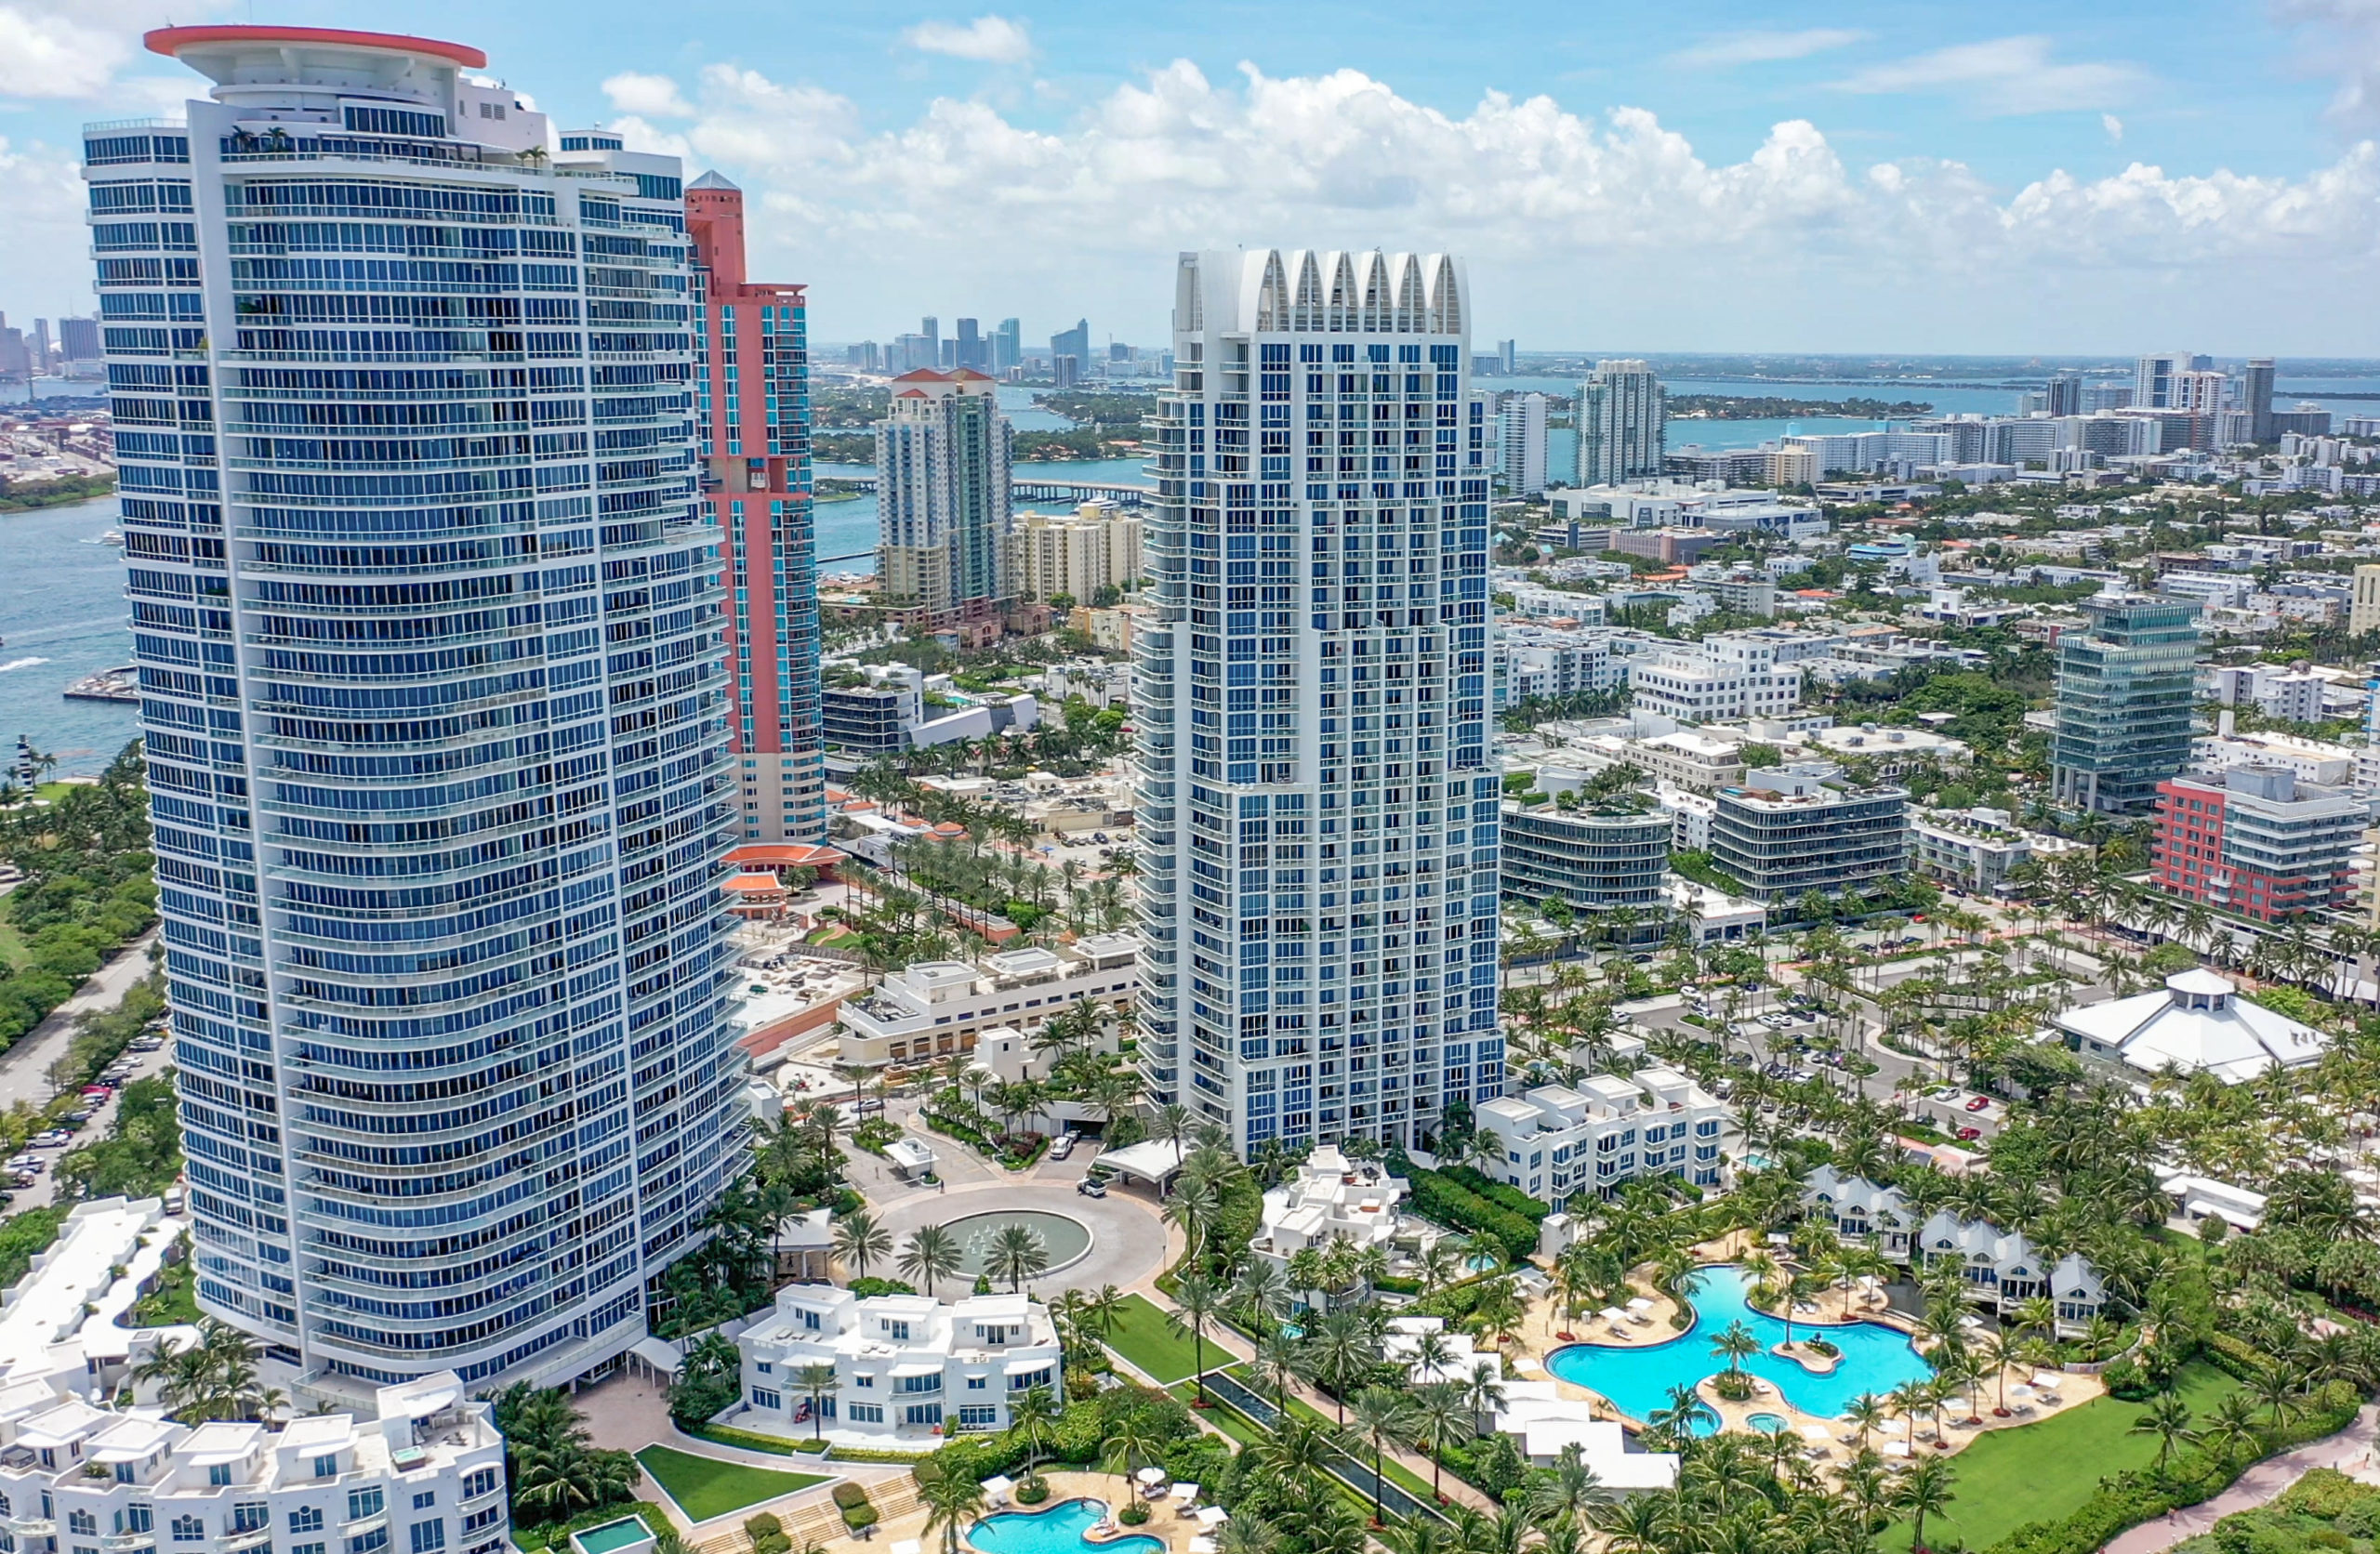 Continuum South Beach Property of the Month | Our Special Featured Continuum Unit for Sale